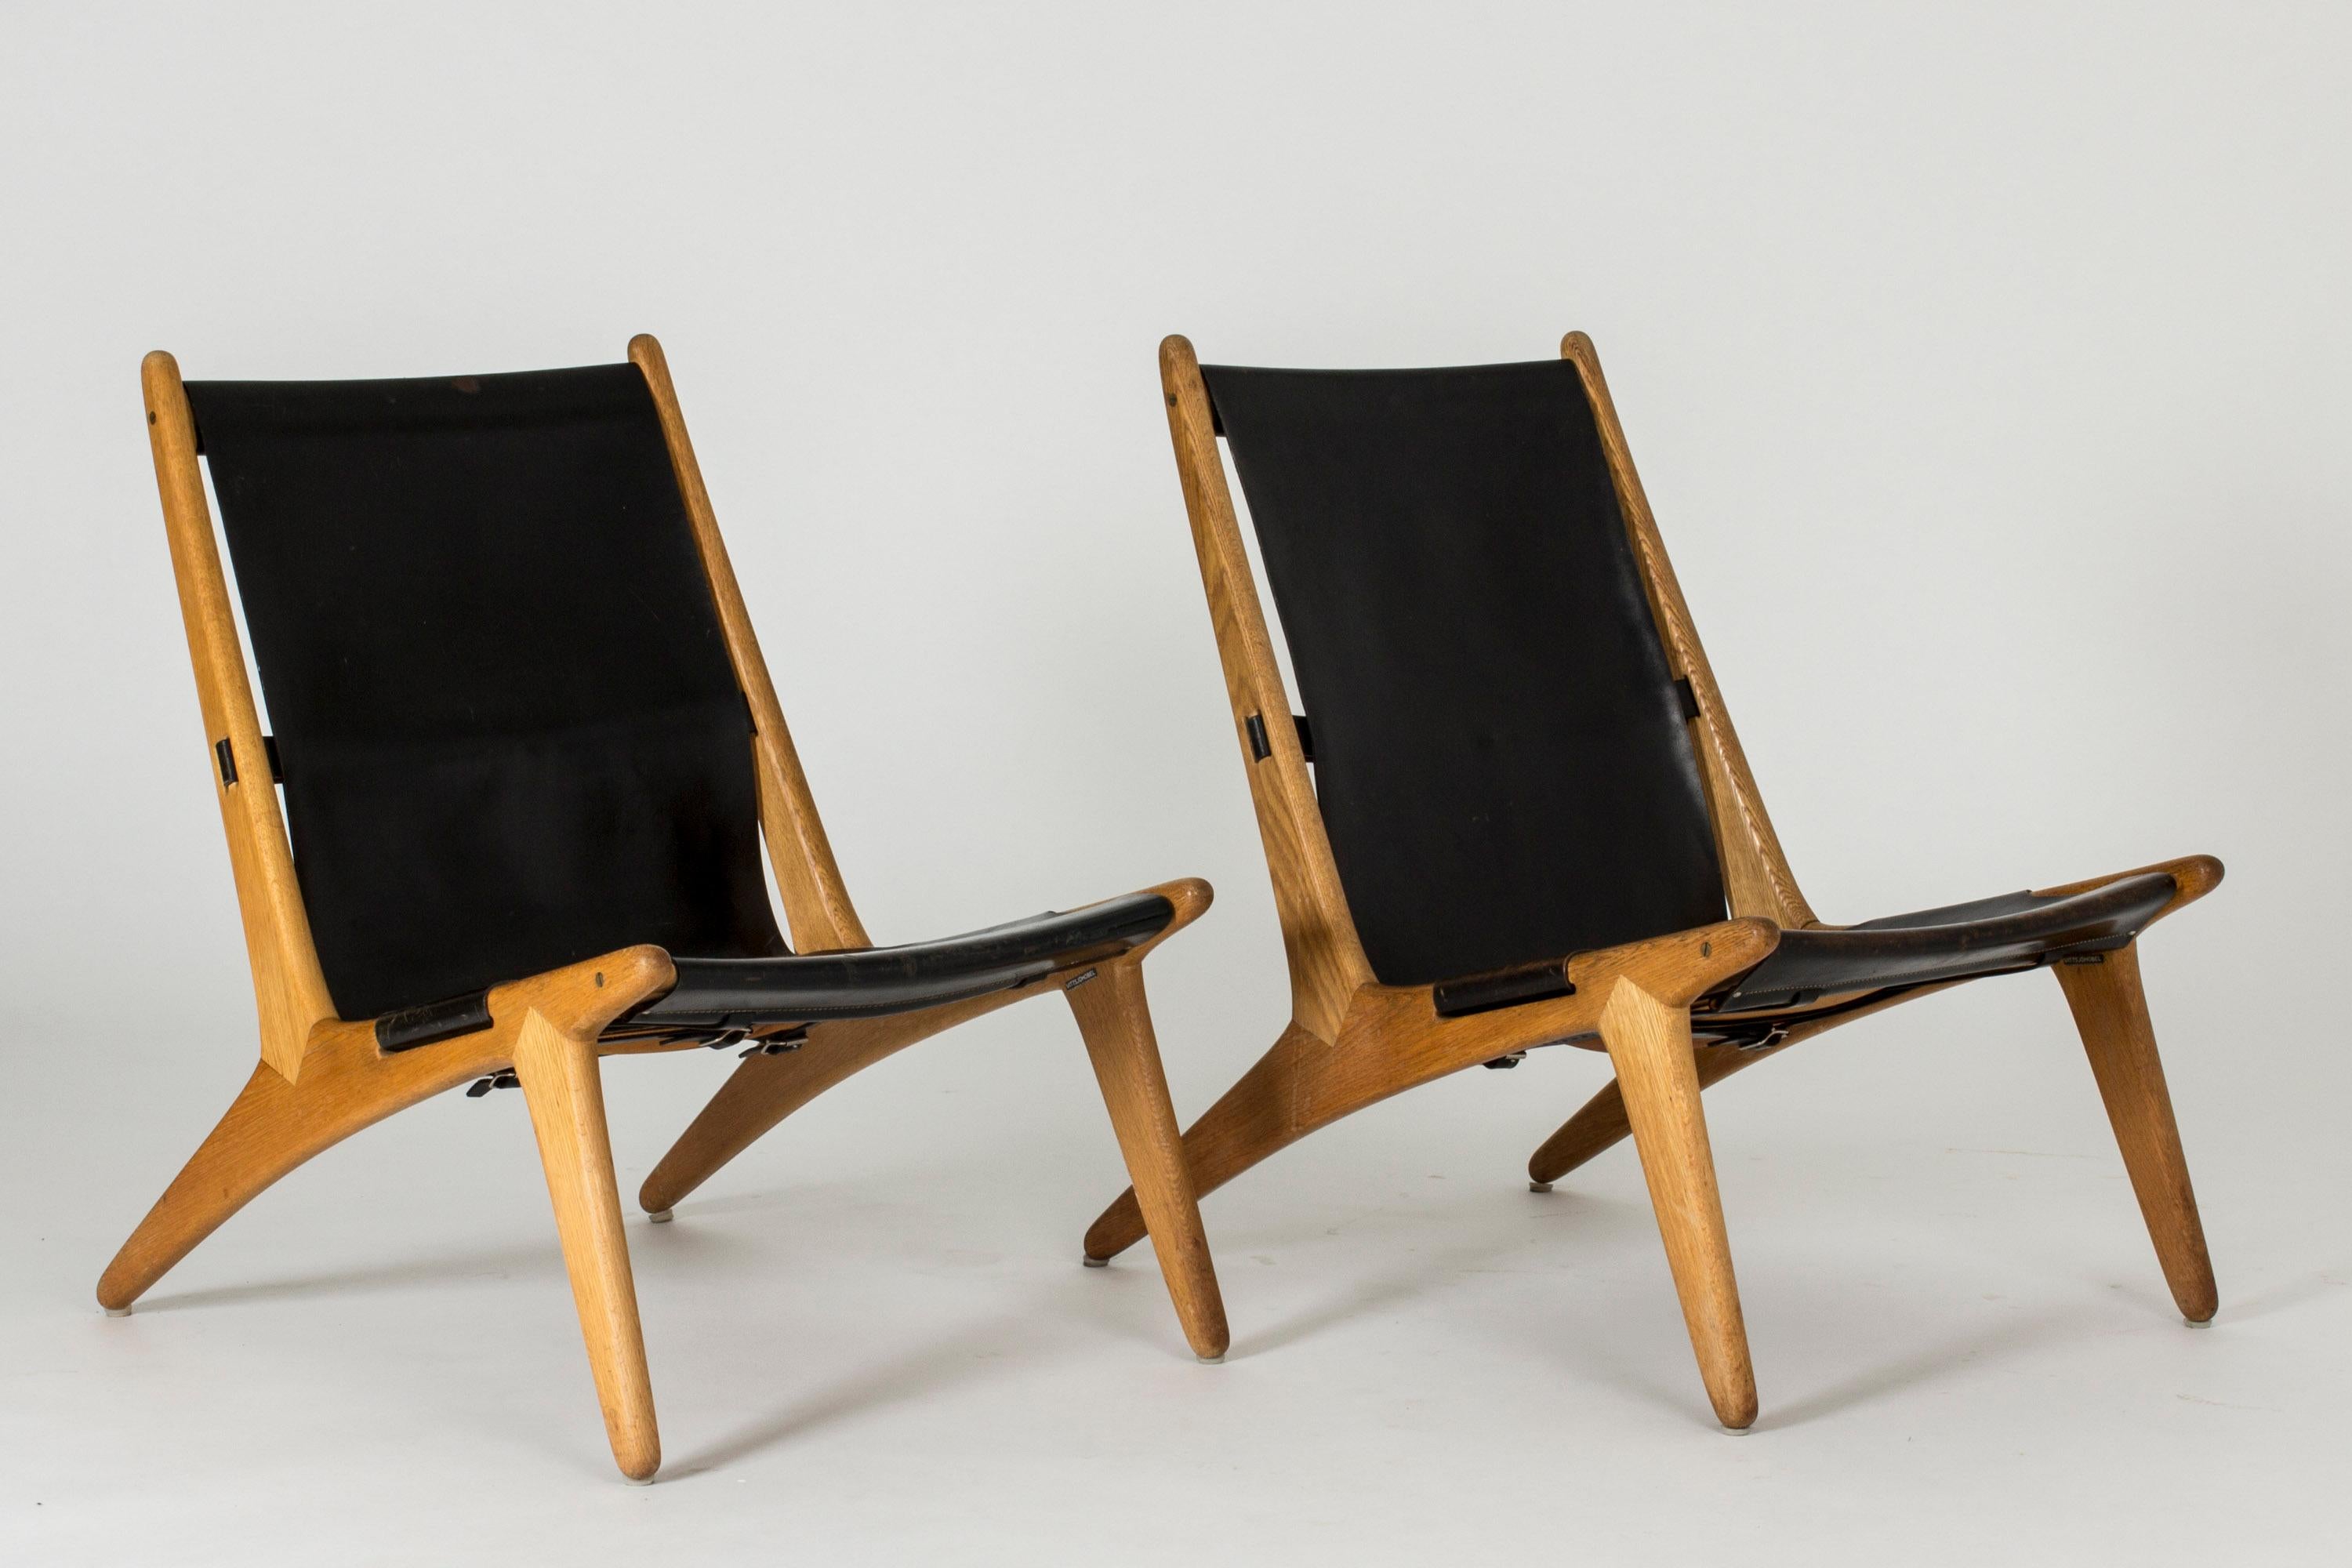 Pair of hunting chairs by Uno & Östen Kristiansson, made in solid teak with leather seats. Casually elegant silhouettes, beautiful joinery, nicely aged leather.